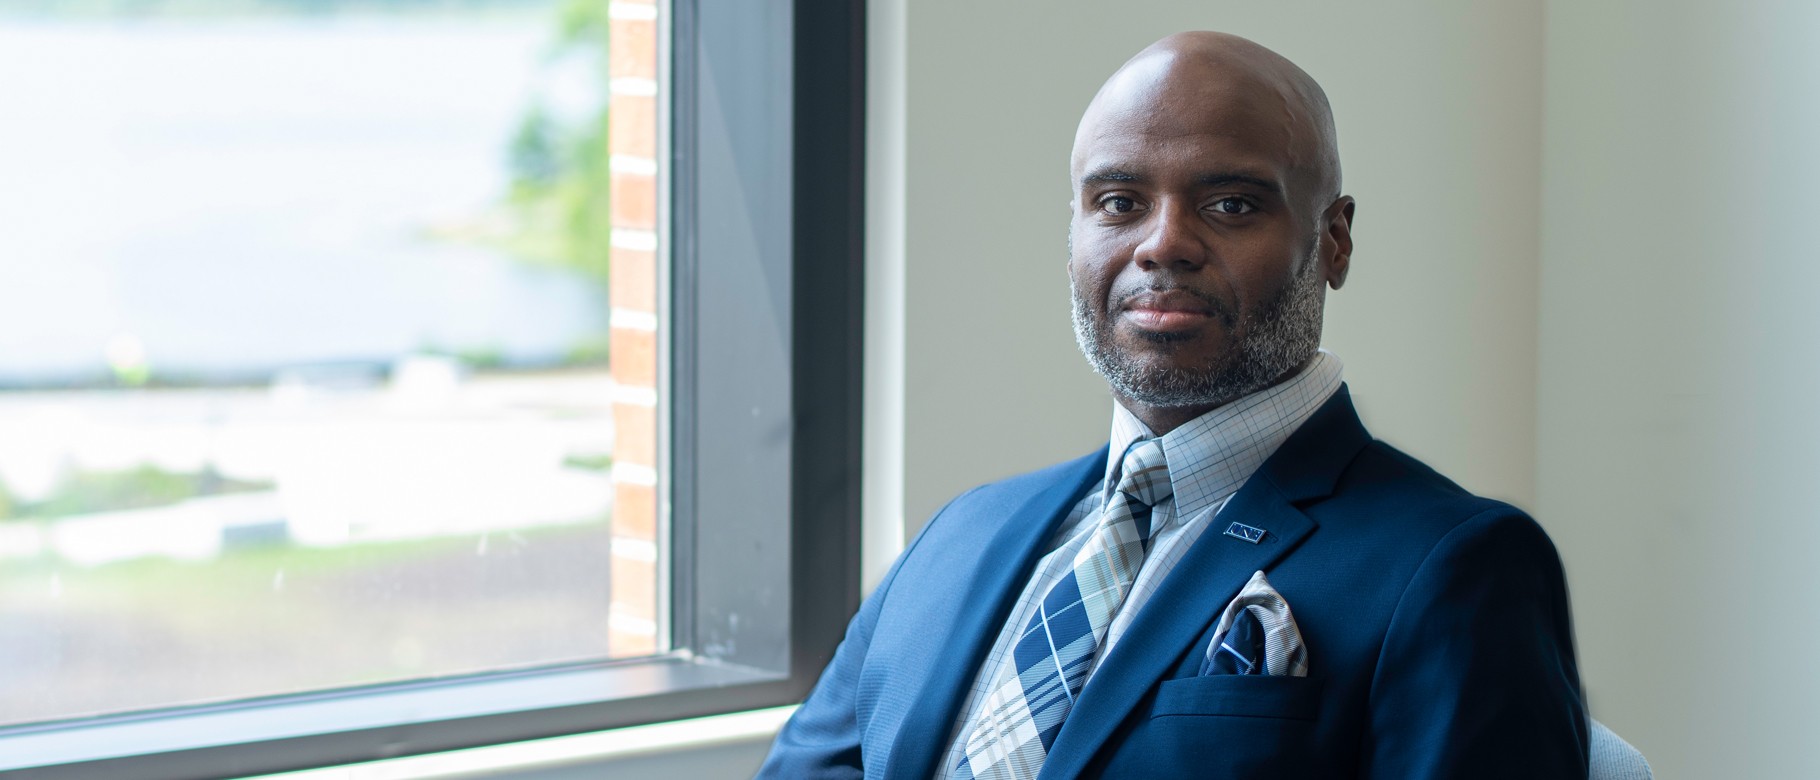 G. Christopher Hunt, Ed.D., will join the university’s leadership team as the Associate Provost for Community, Equity, and Diversity on Aug. 1.